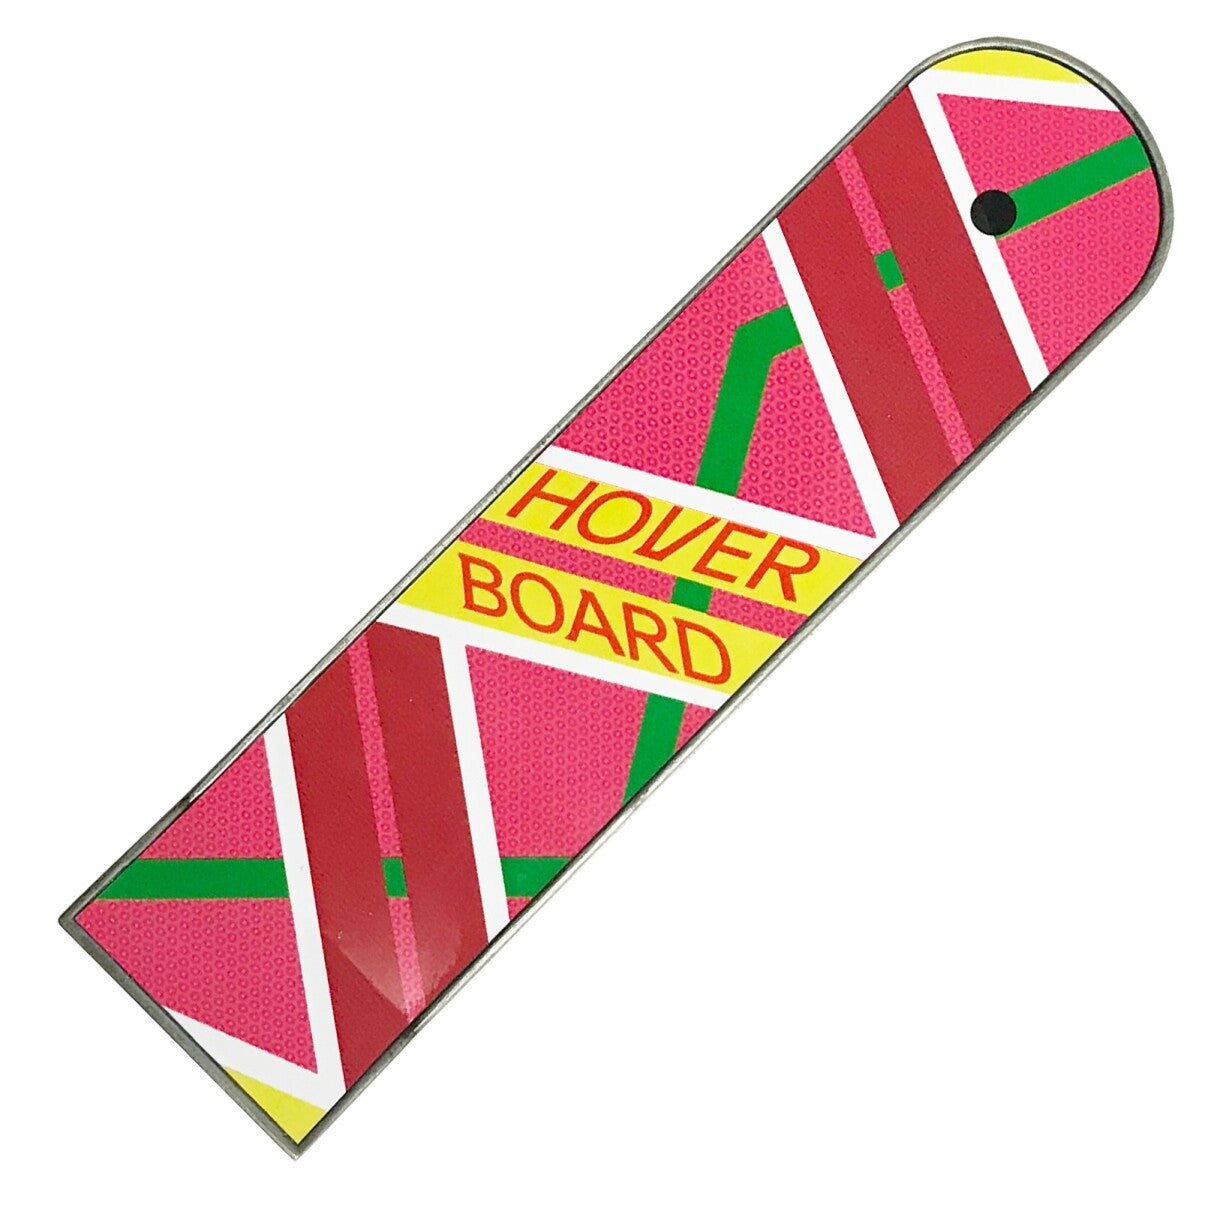  Back to the Future: Marty McFly Hover Board Bottle Opener  5060224089170